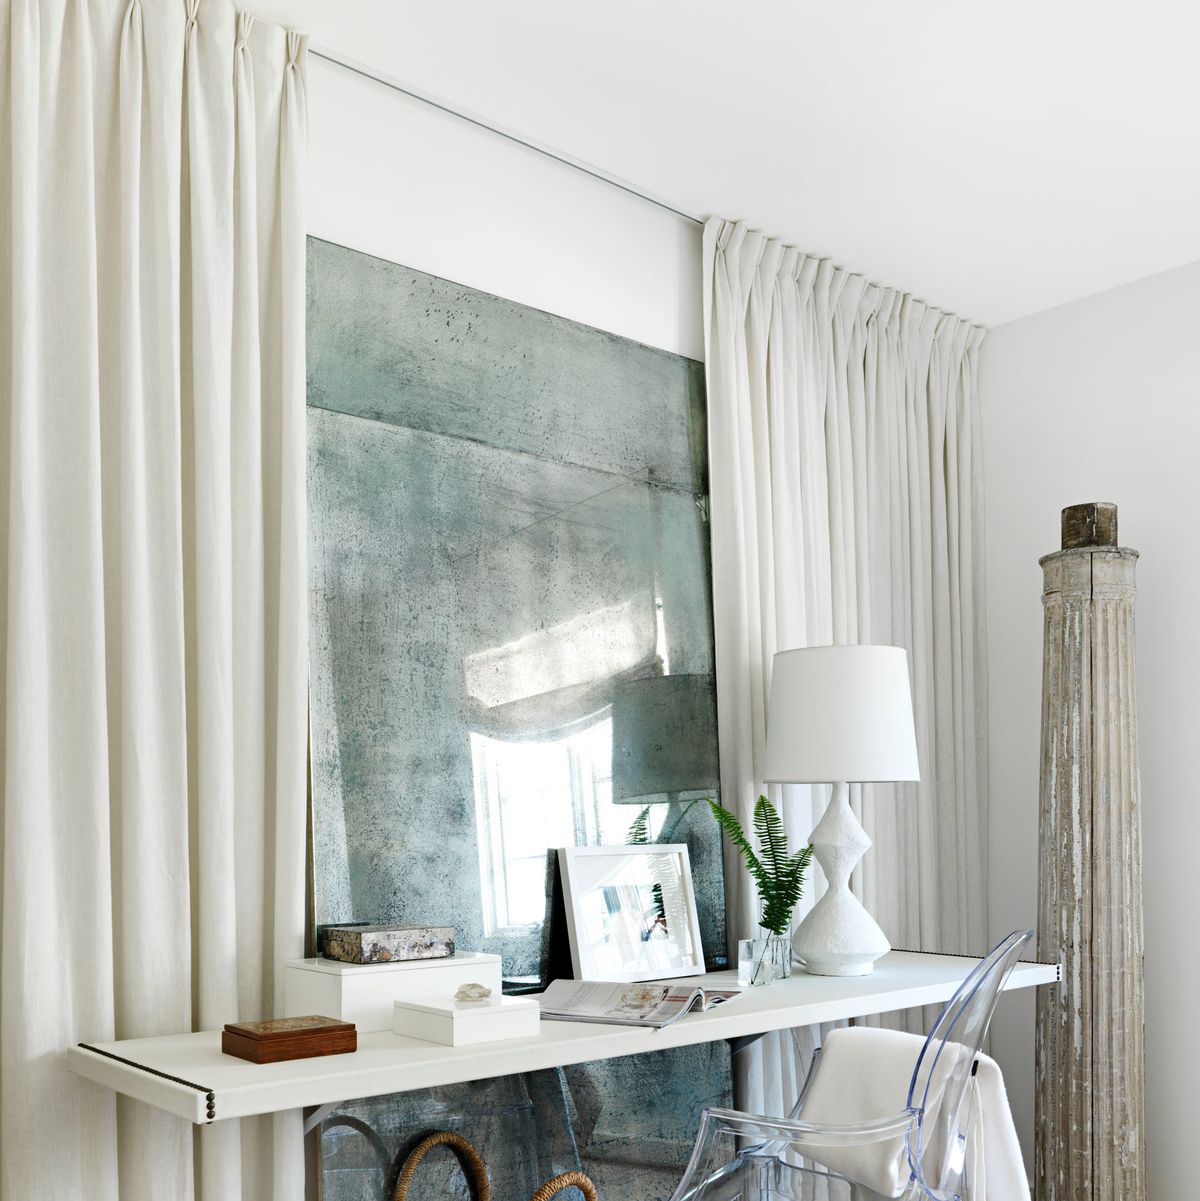 20 Chic and Inspiring Built-in Desk Ideas